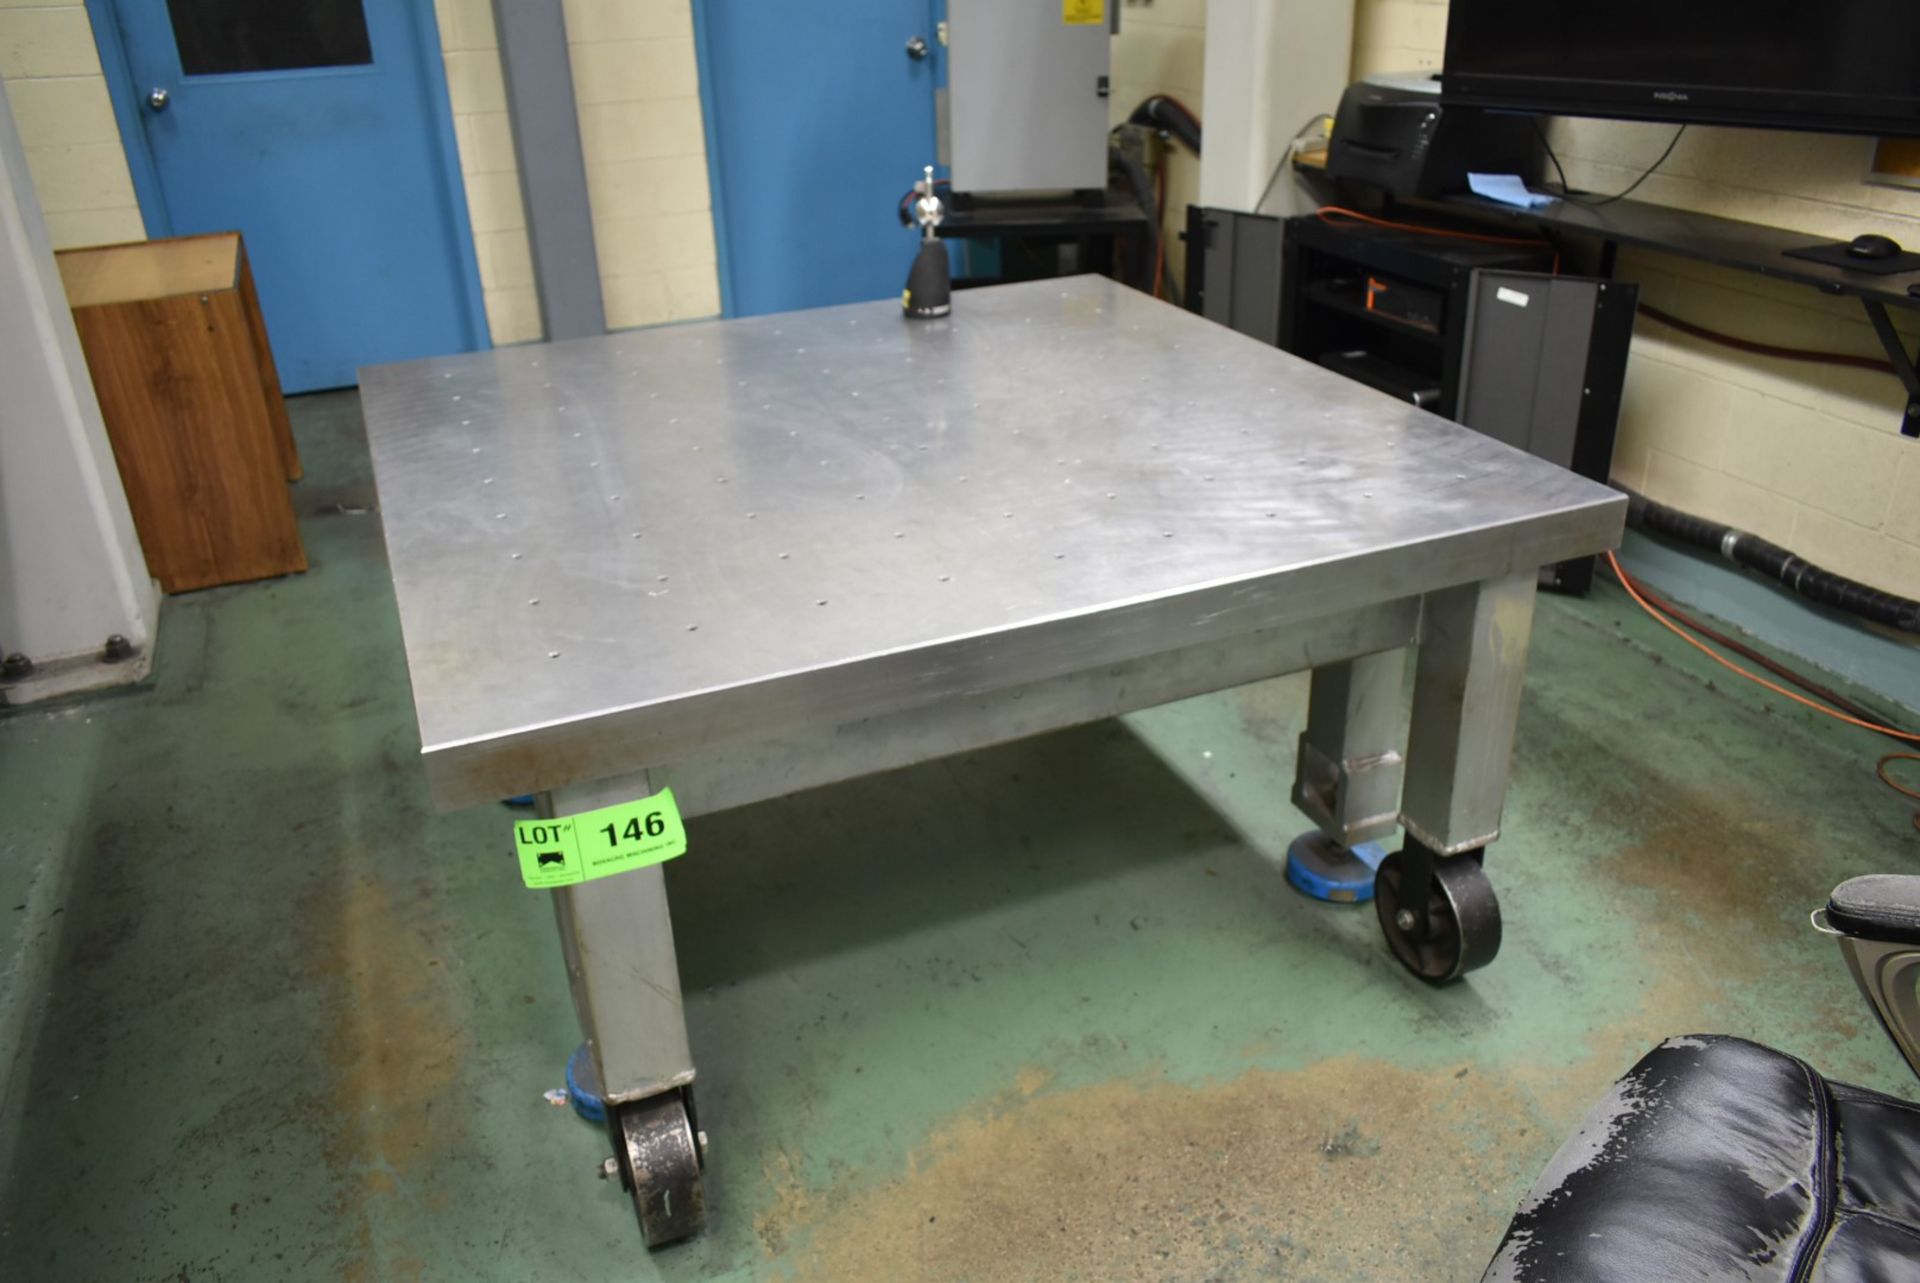 60" X 60" X 3" PRECISION LAYOUT TABLE [RIGGING FEE FOR LOT#146 - $150 USD PLUS APPLICABLE TAXES]